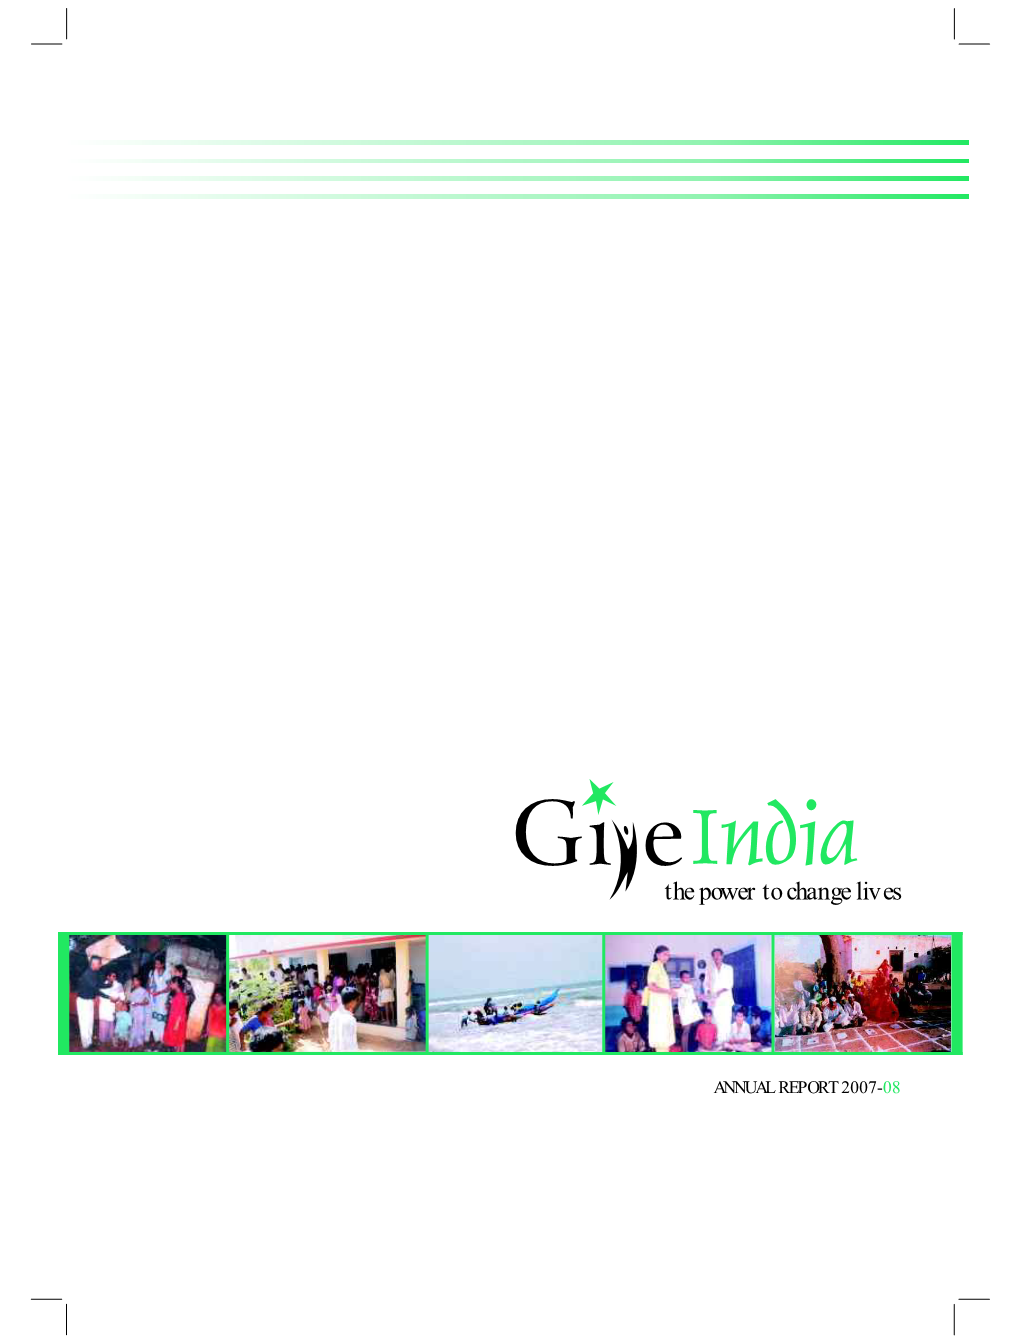 ANNUAL REPORT 2007-08 About Giveindia